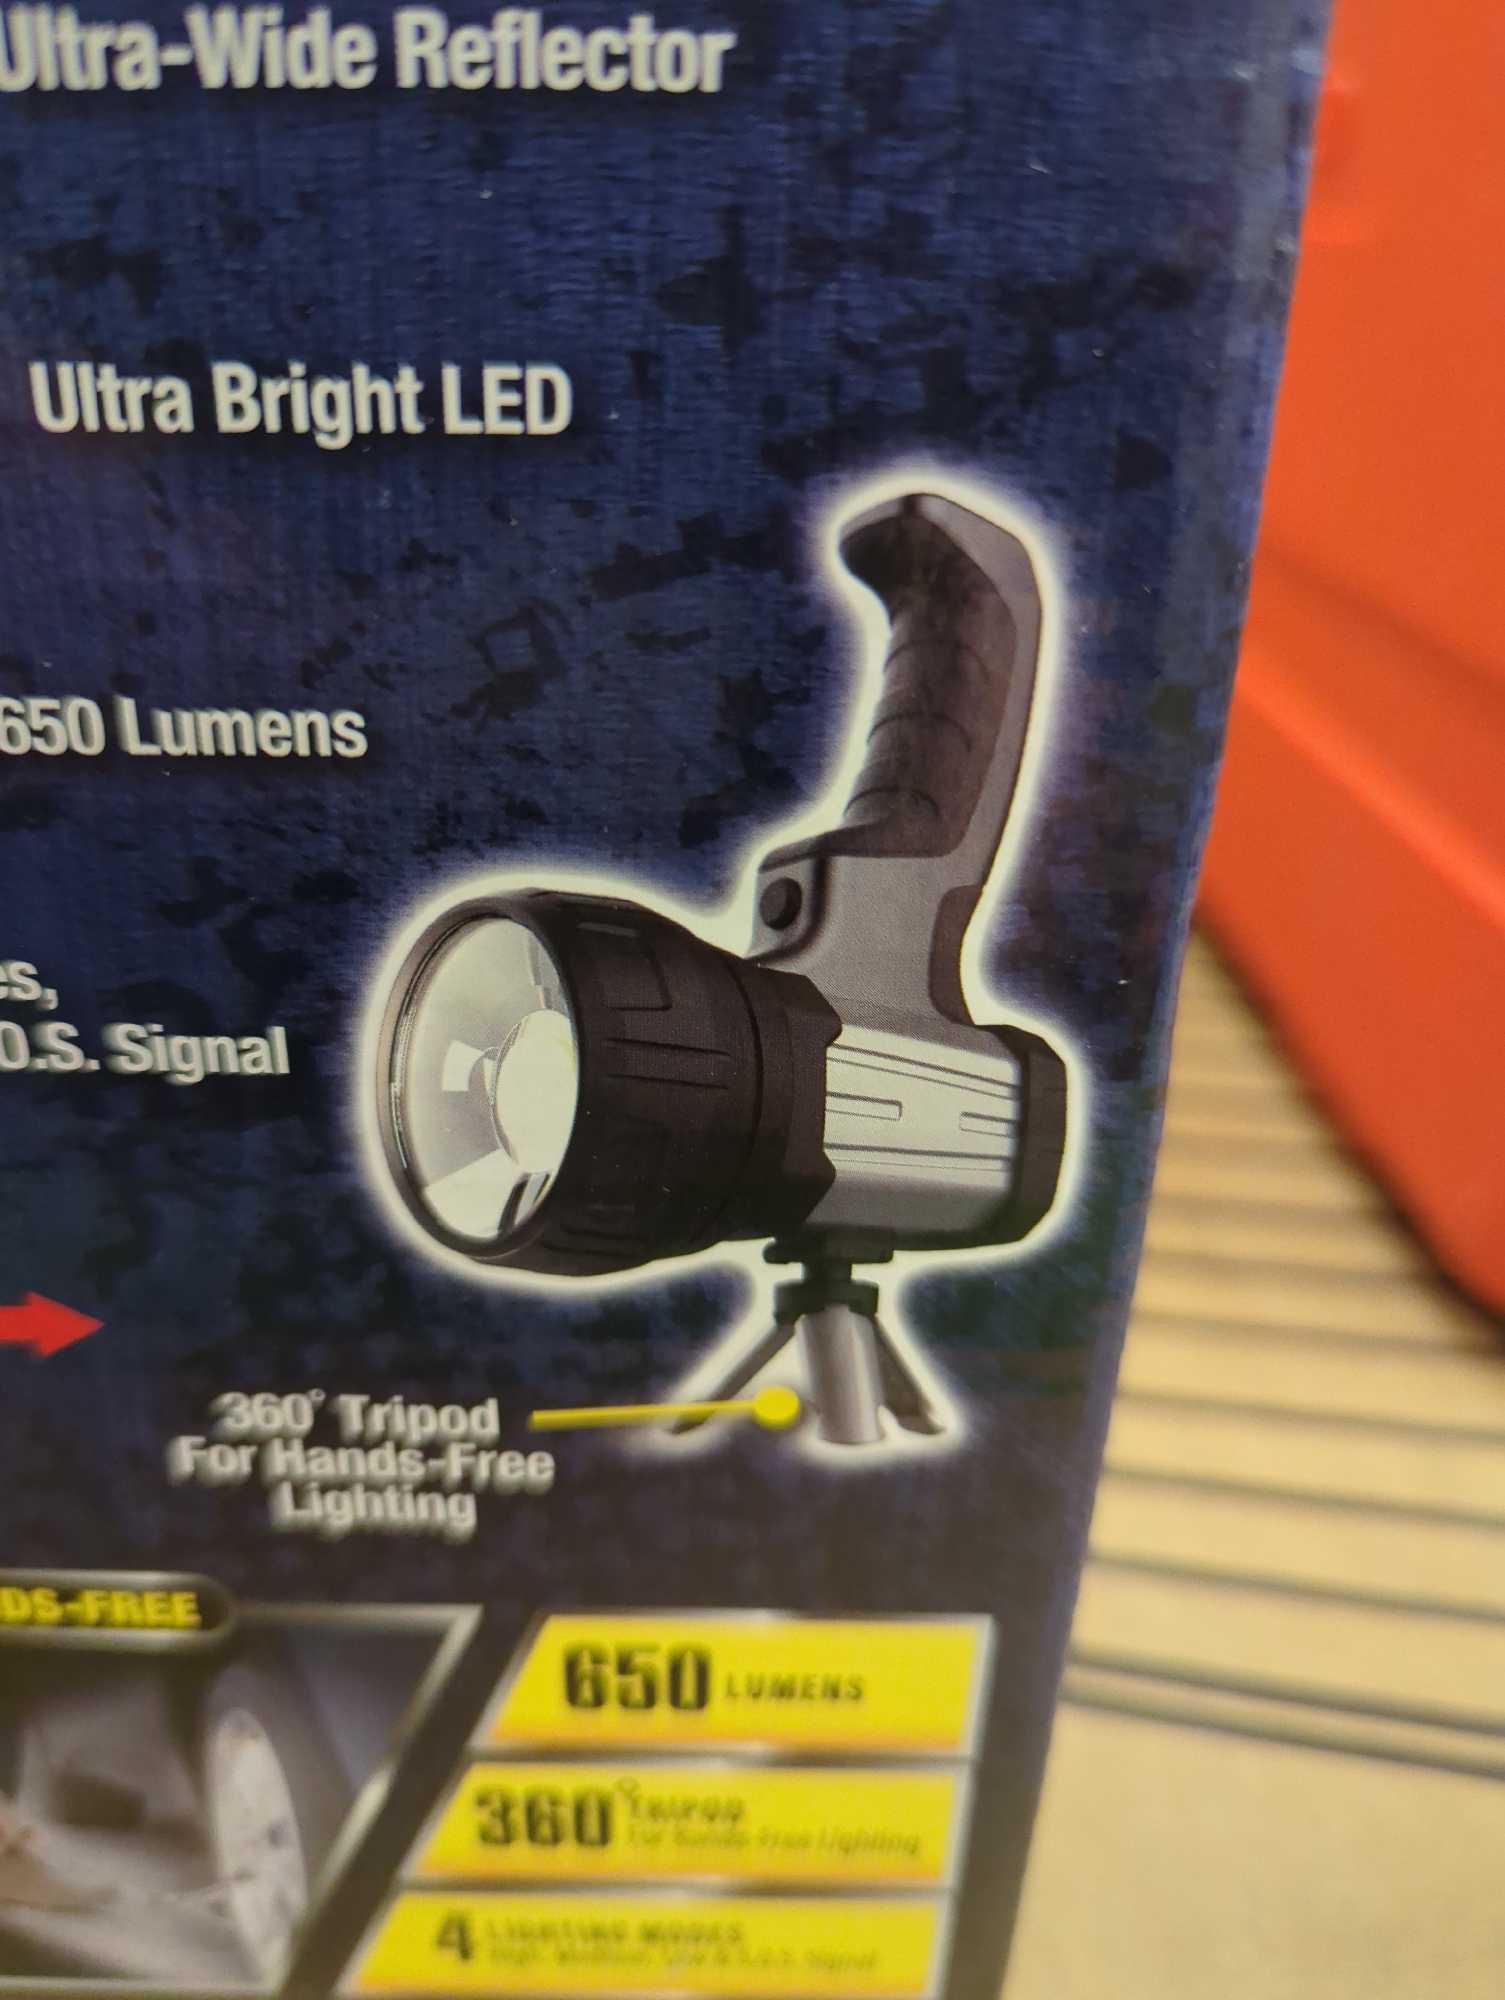 HANDY BRITE Ultra-Bright LED Cordless 2-in-1 Tripod Work Light, Appears to be New in Factory Sealed